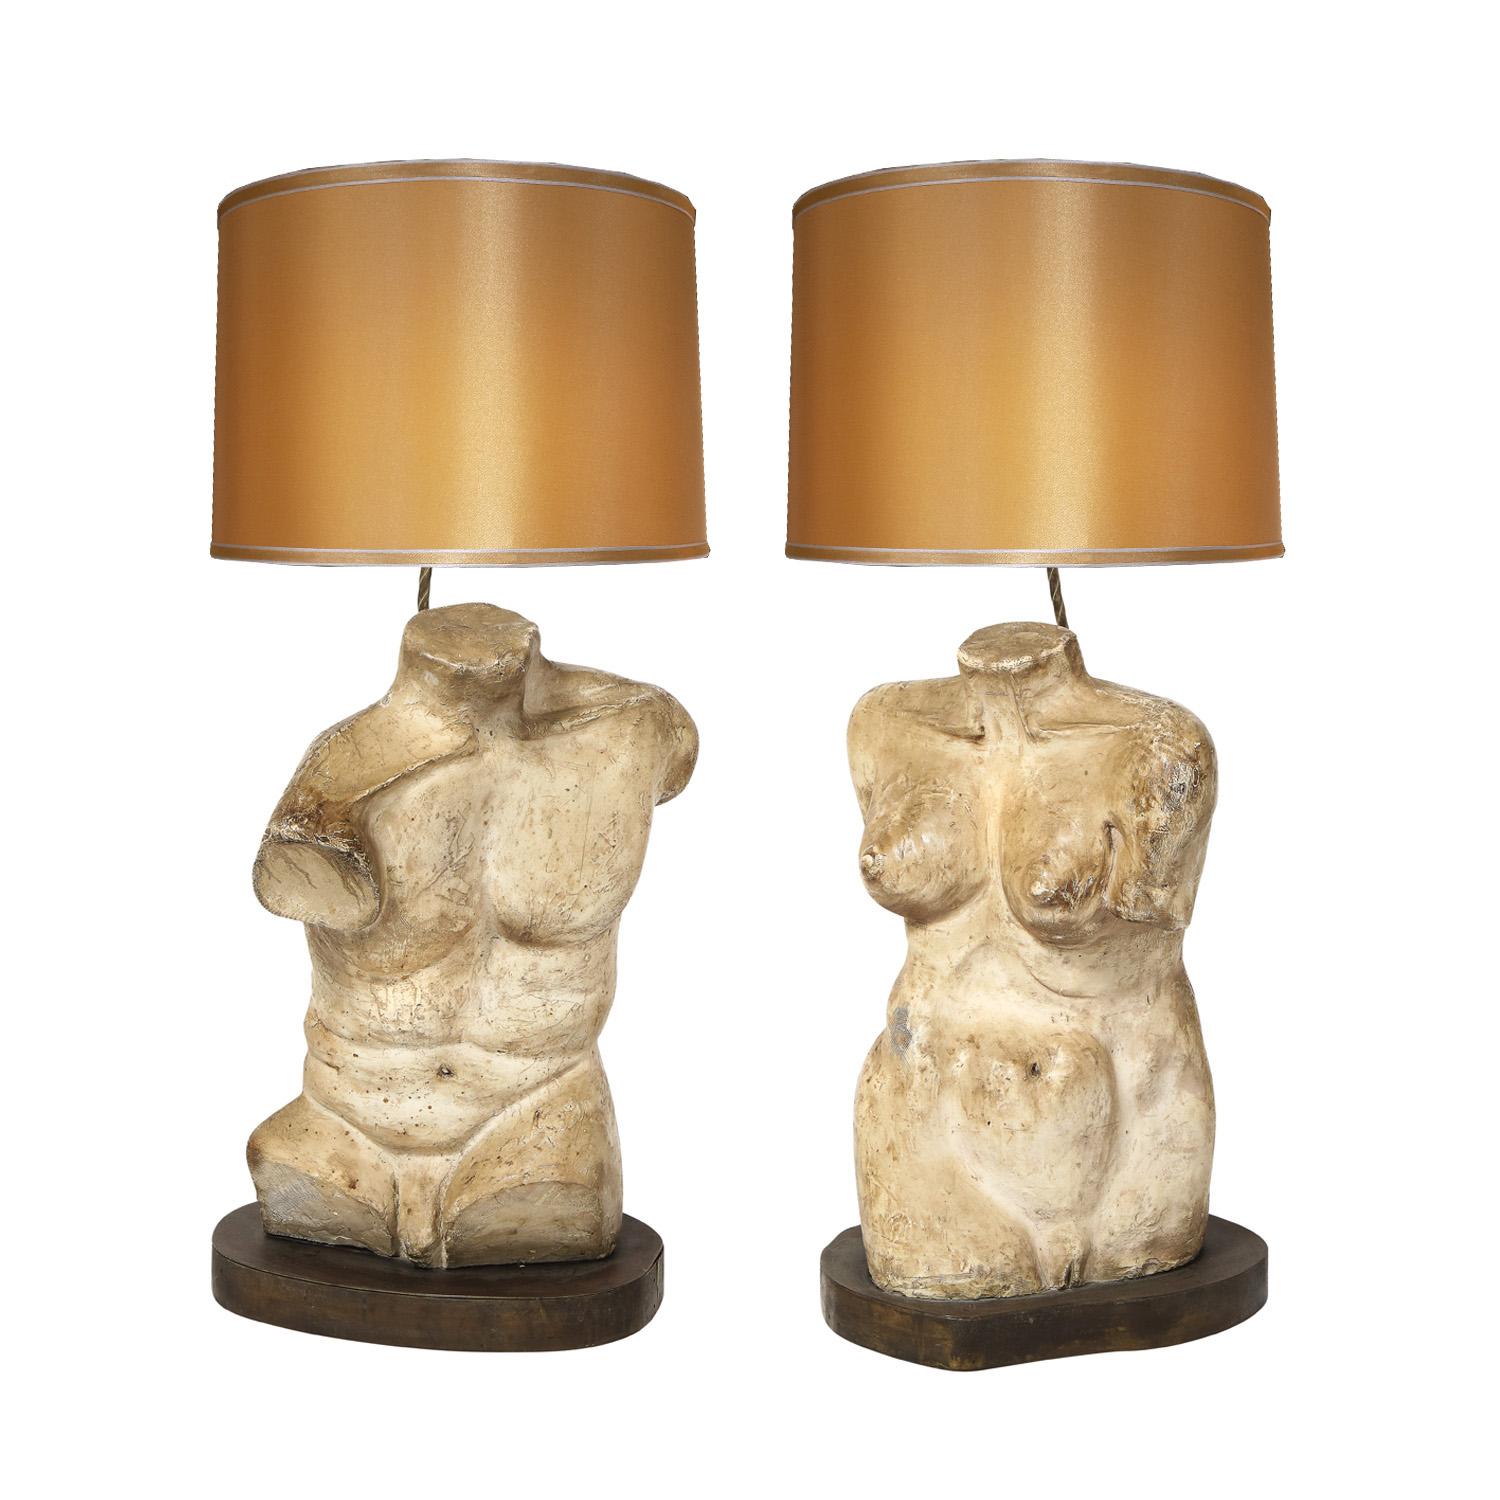 Rare and important male and female torso table lamps in Hydro Stone plaster on patinated bronze bases by Philip & Kelvin LaVerne, American ca. 1970 (signed 